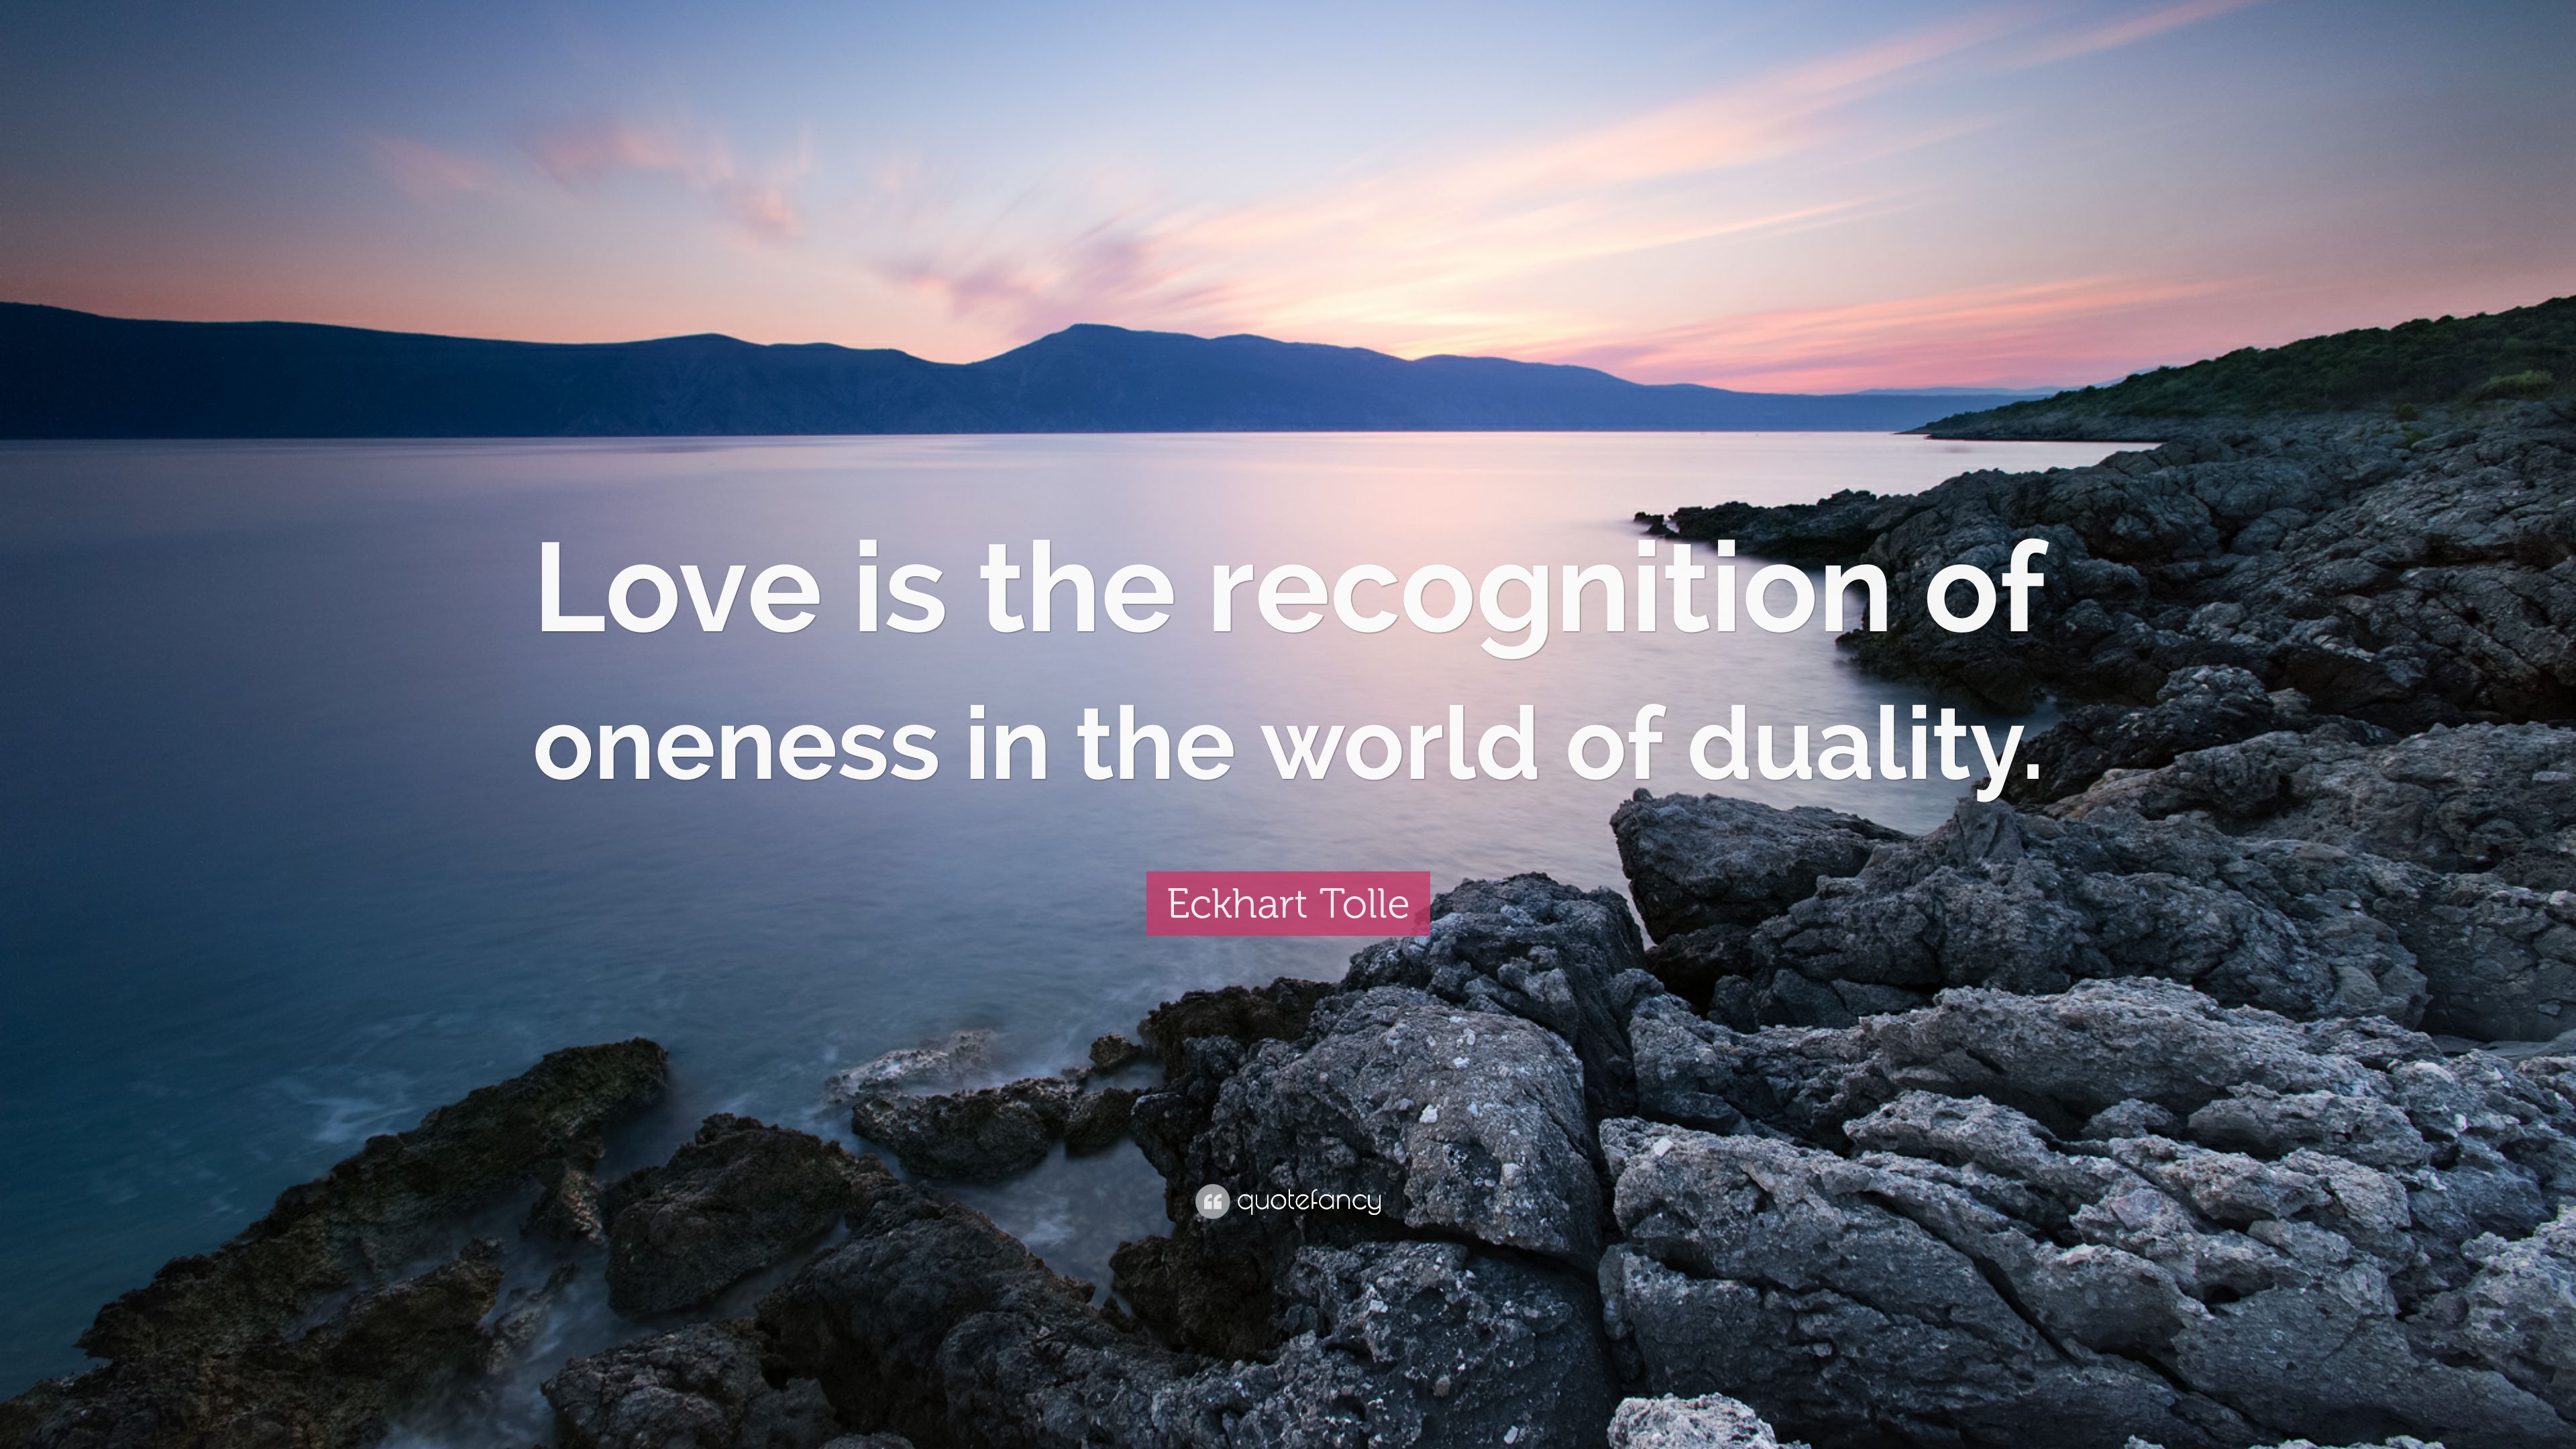 Eckhart Tolle Quote: “Love is the recognition of oneness in the world of duality.” (12 wallpaper)